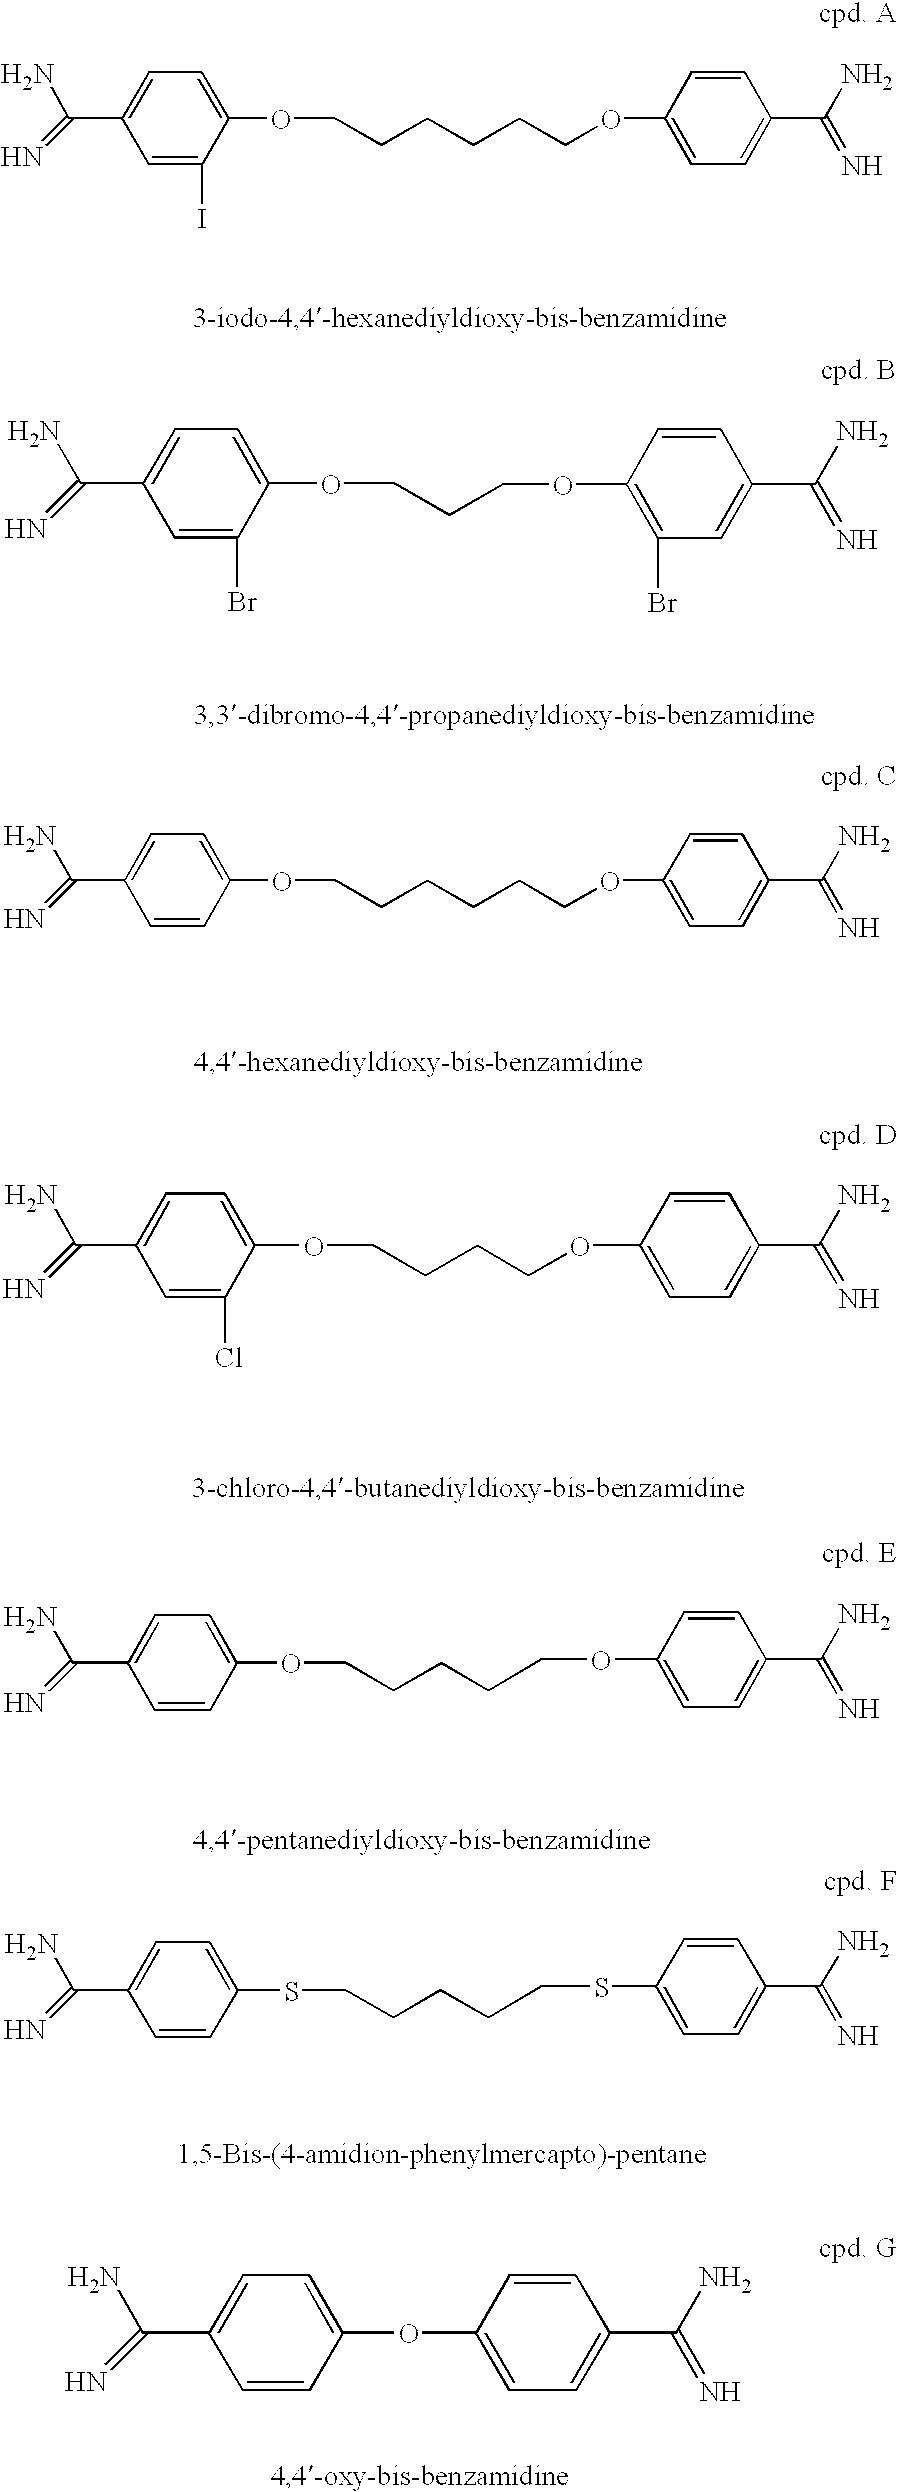 Structure based discovery of inhibitors of matriptase for the treatment of cancer and other conditions